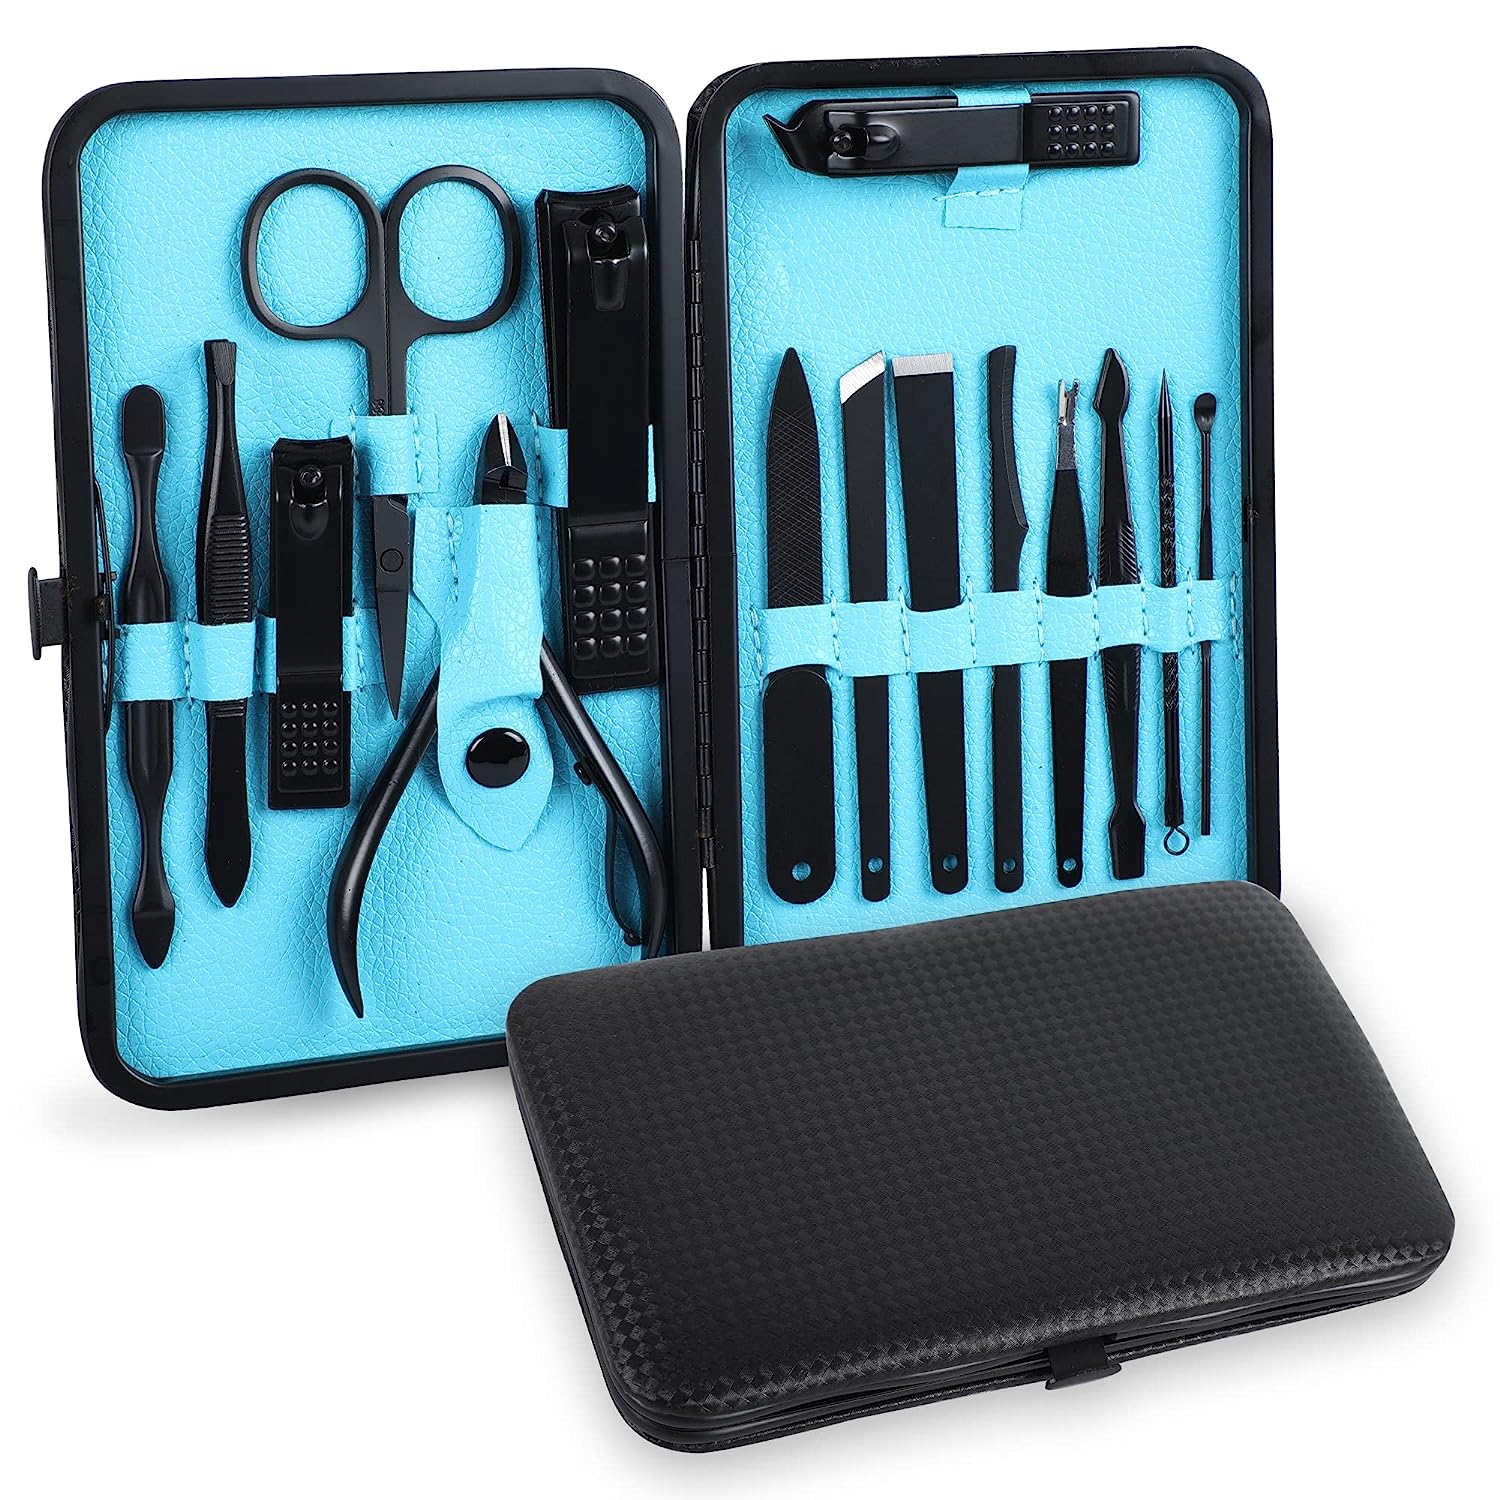 GEMAX Nail Clippers, 30 in 1 Professional Nail Kit, Manicure Set for  Pedicure an | eBay